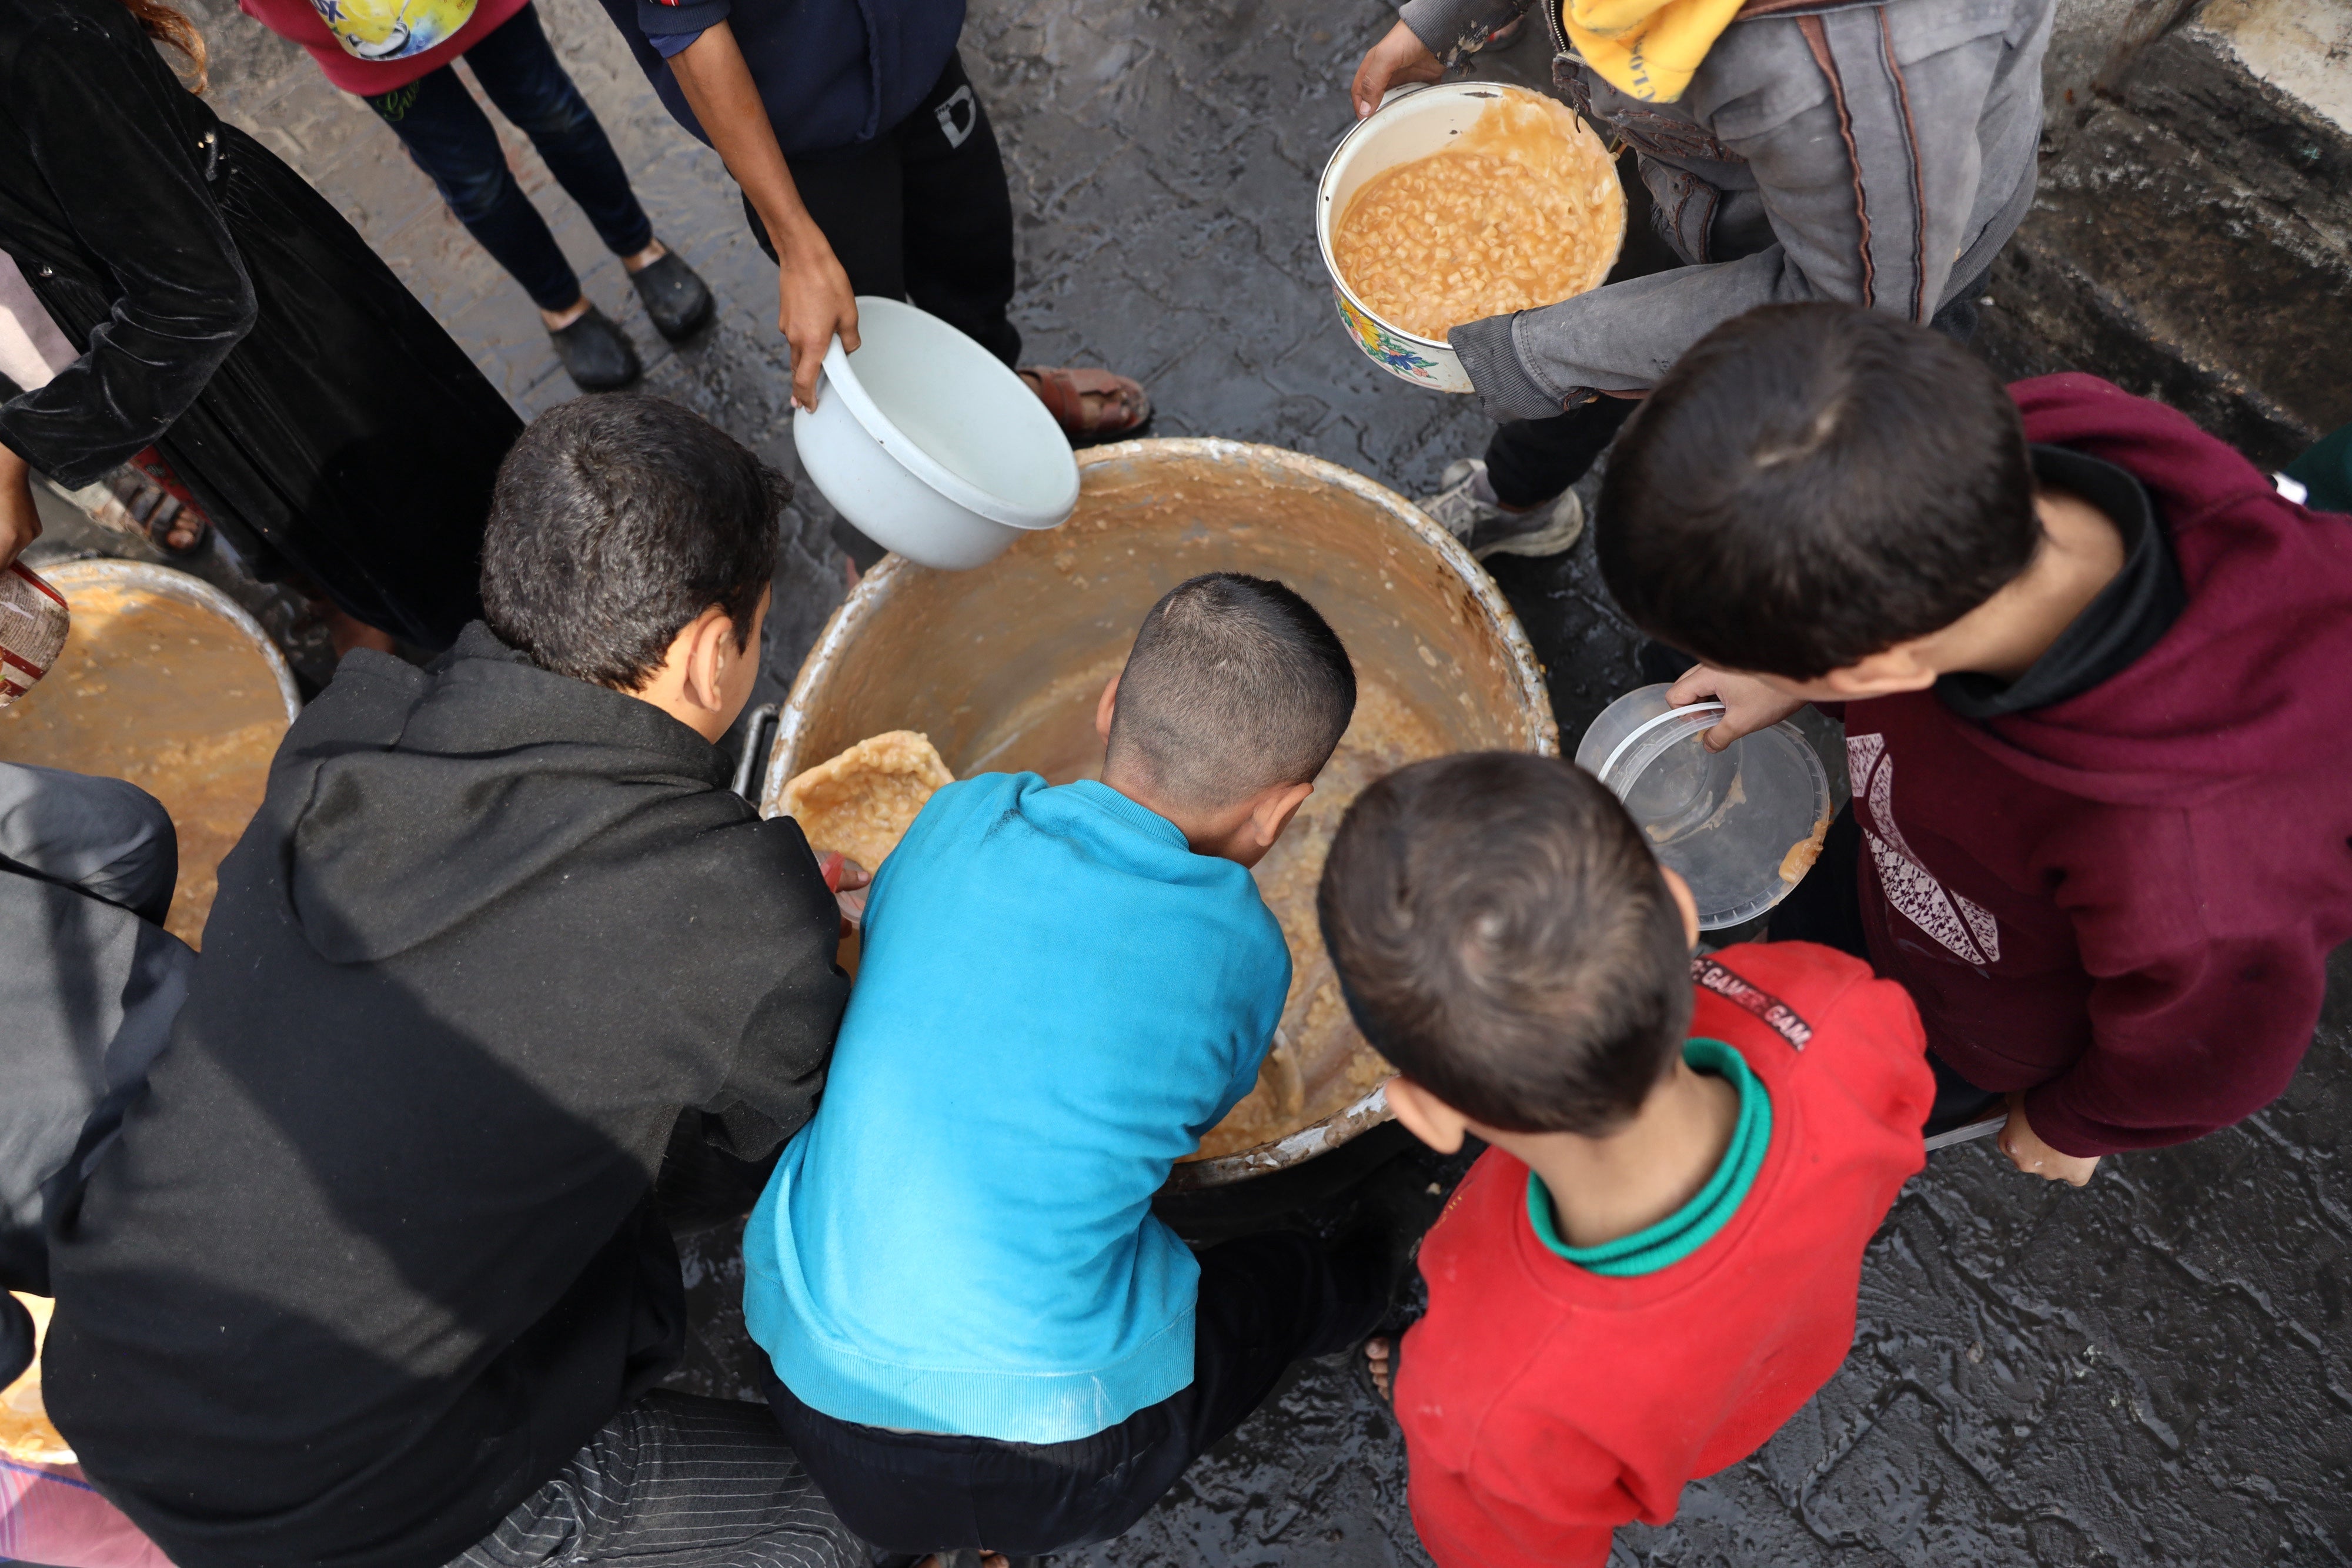 Backview of four young boys with black, blue and red shirts reaching into food containers.